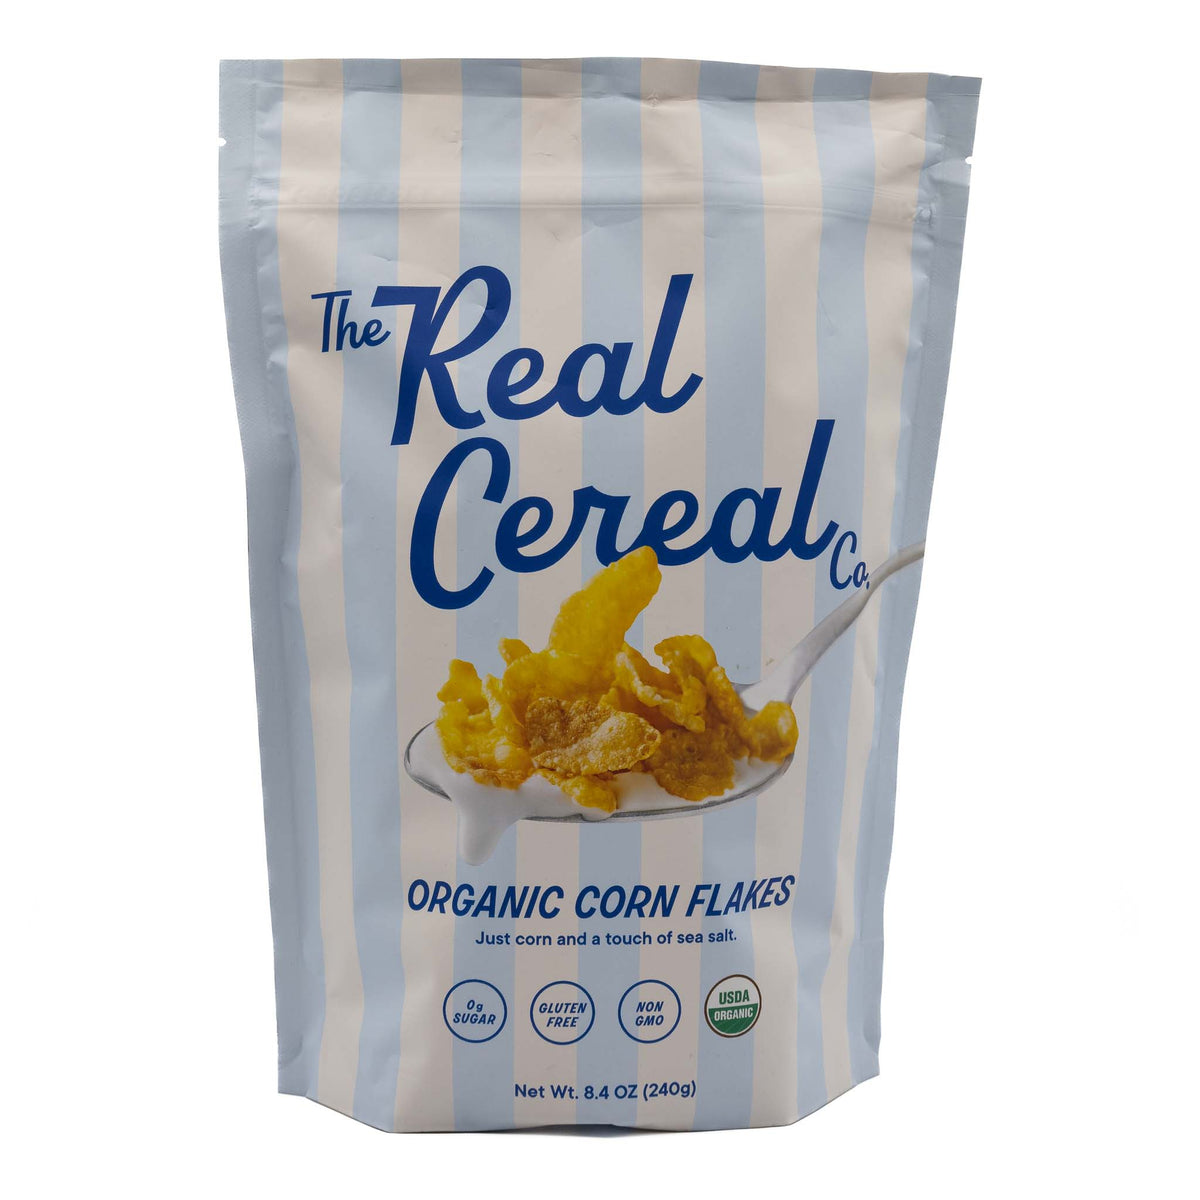 The Real Cereal Corn Flakes